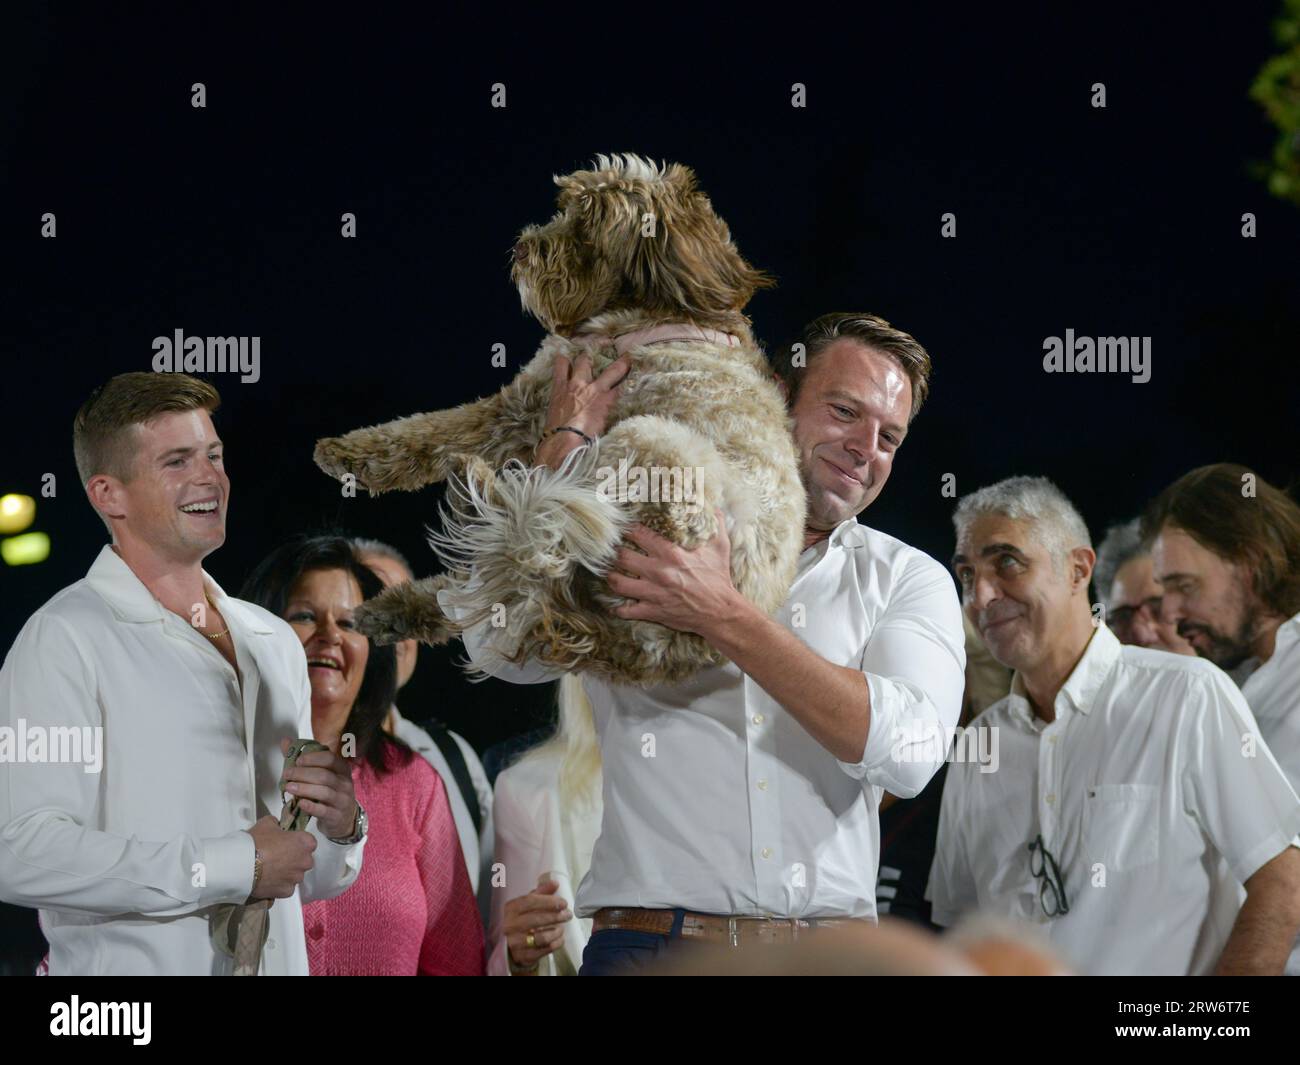 Athens, Greece - 16 September 2023. Stefanos Kasselakis (R) embraces his dog accompanied by his  husband, during his election campaign as a candidate for  the leadership of SYRIZA party. The 35-year-old self-made businessman has ignited a spectrum of reactions as he is young, attractive, affluent, self-made, of Greek descent, multilingual, openly gay, an advocate for animal rights, soon-to-be father and he also promises to bring  a new era of renewal for SYRIZA. Credit: Dimitris Aspiotis/Alamy Stock Photo